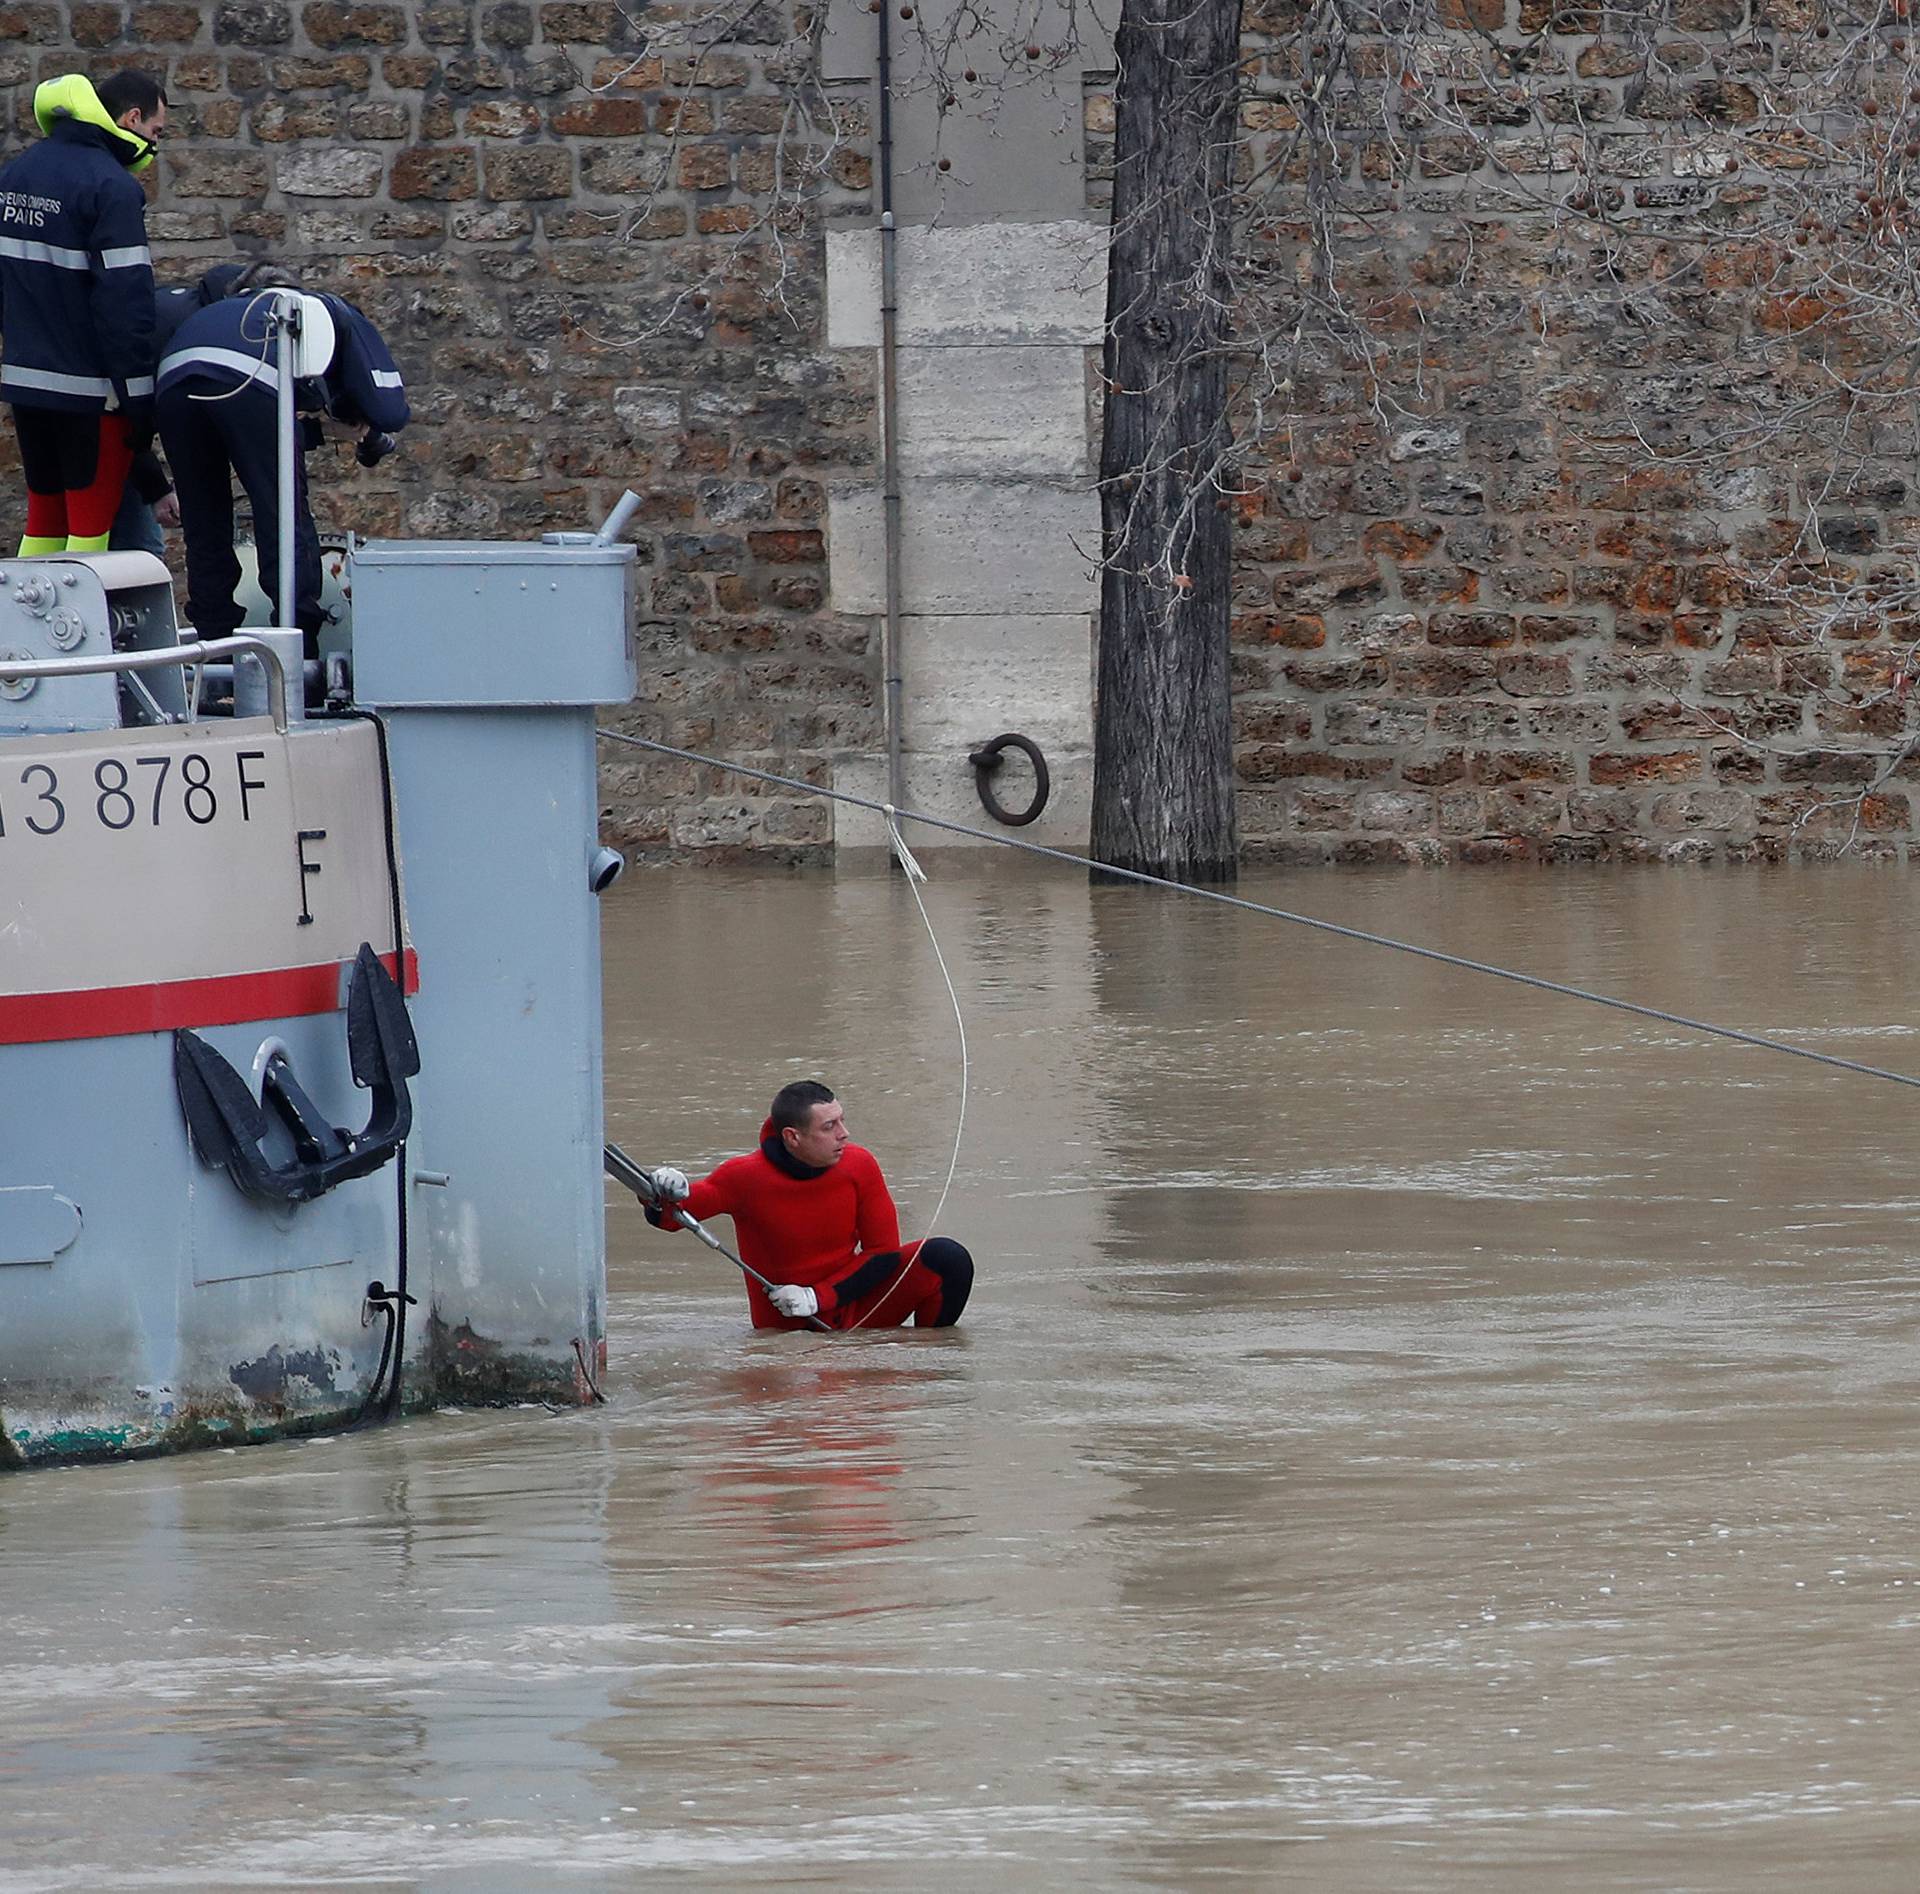 A Paris fire-brigade diver checks the mooring-ropes of a peniche boat moored on the flooded banks of the Seine River in Paris